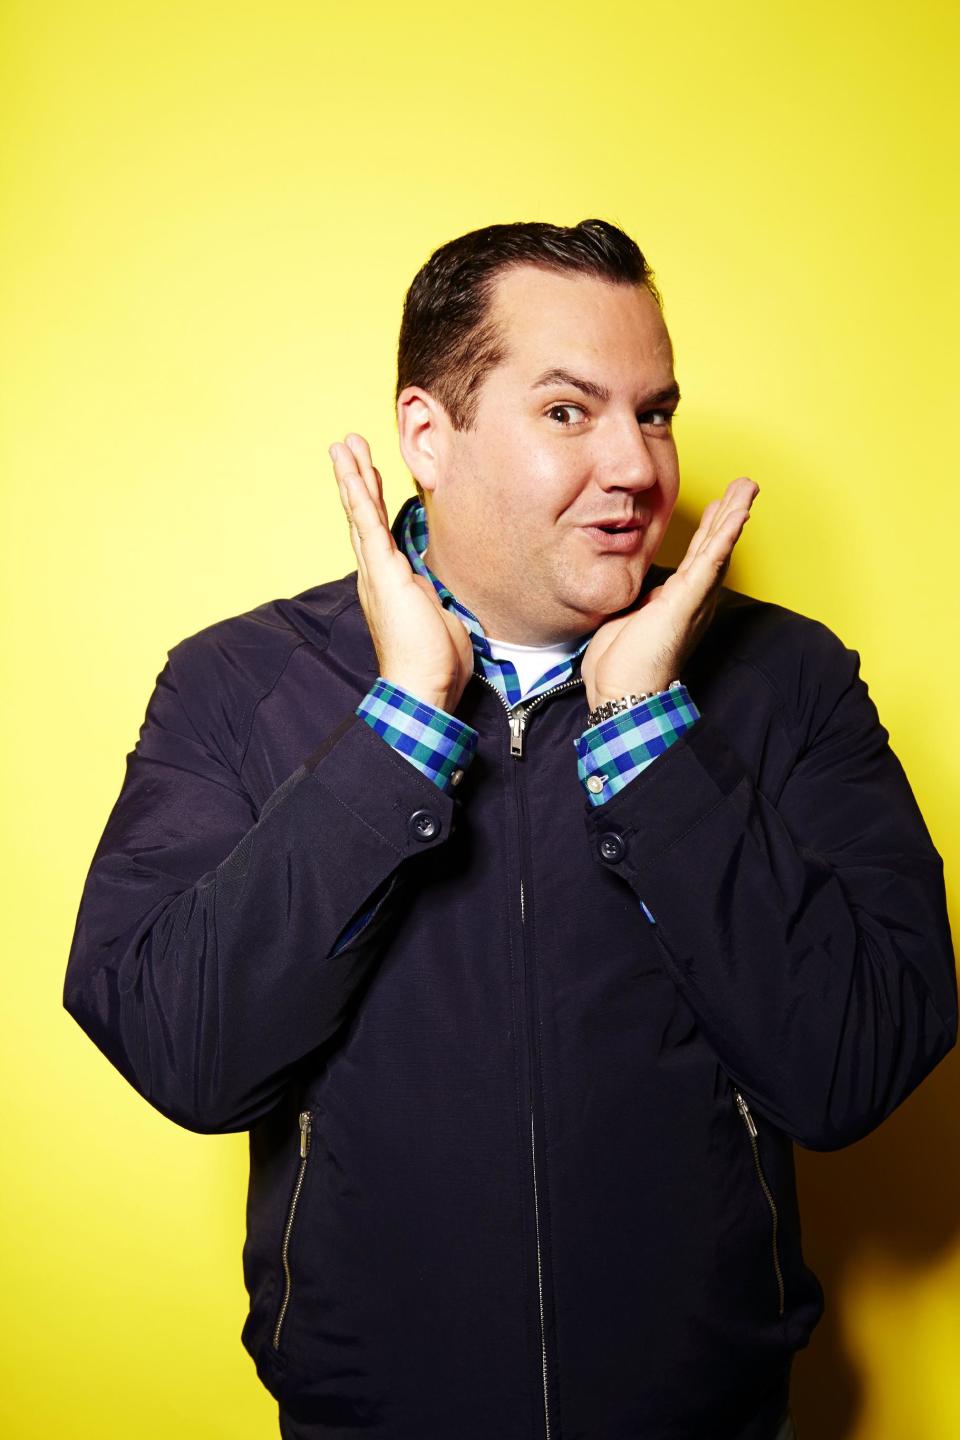 This Aug. 26, 2013 photo shows TV personality Ross Mathews in New York. Matthews hosts the E! Network interactive talk show "Hello Ross!" airing Fridays. (Photo by Dan Hallman/Invision/AP)